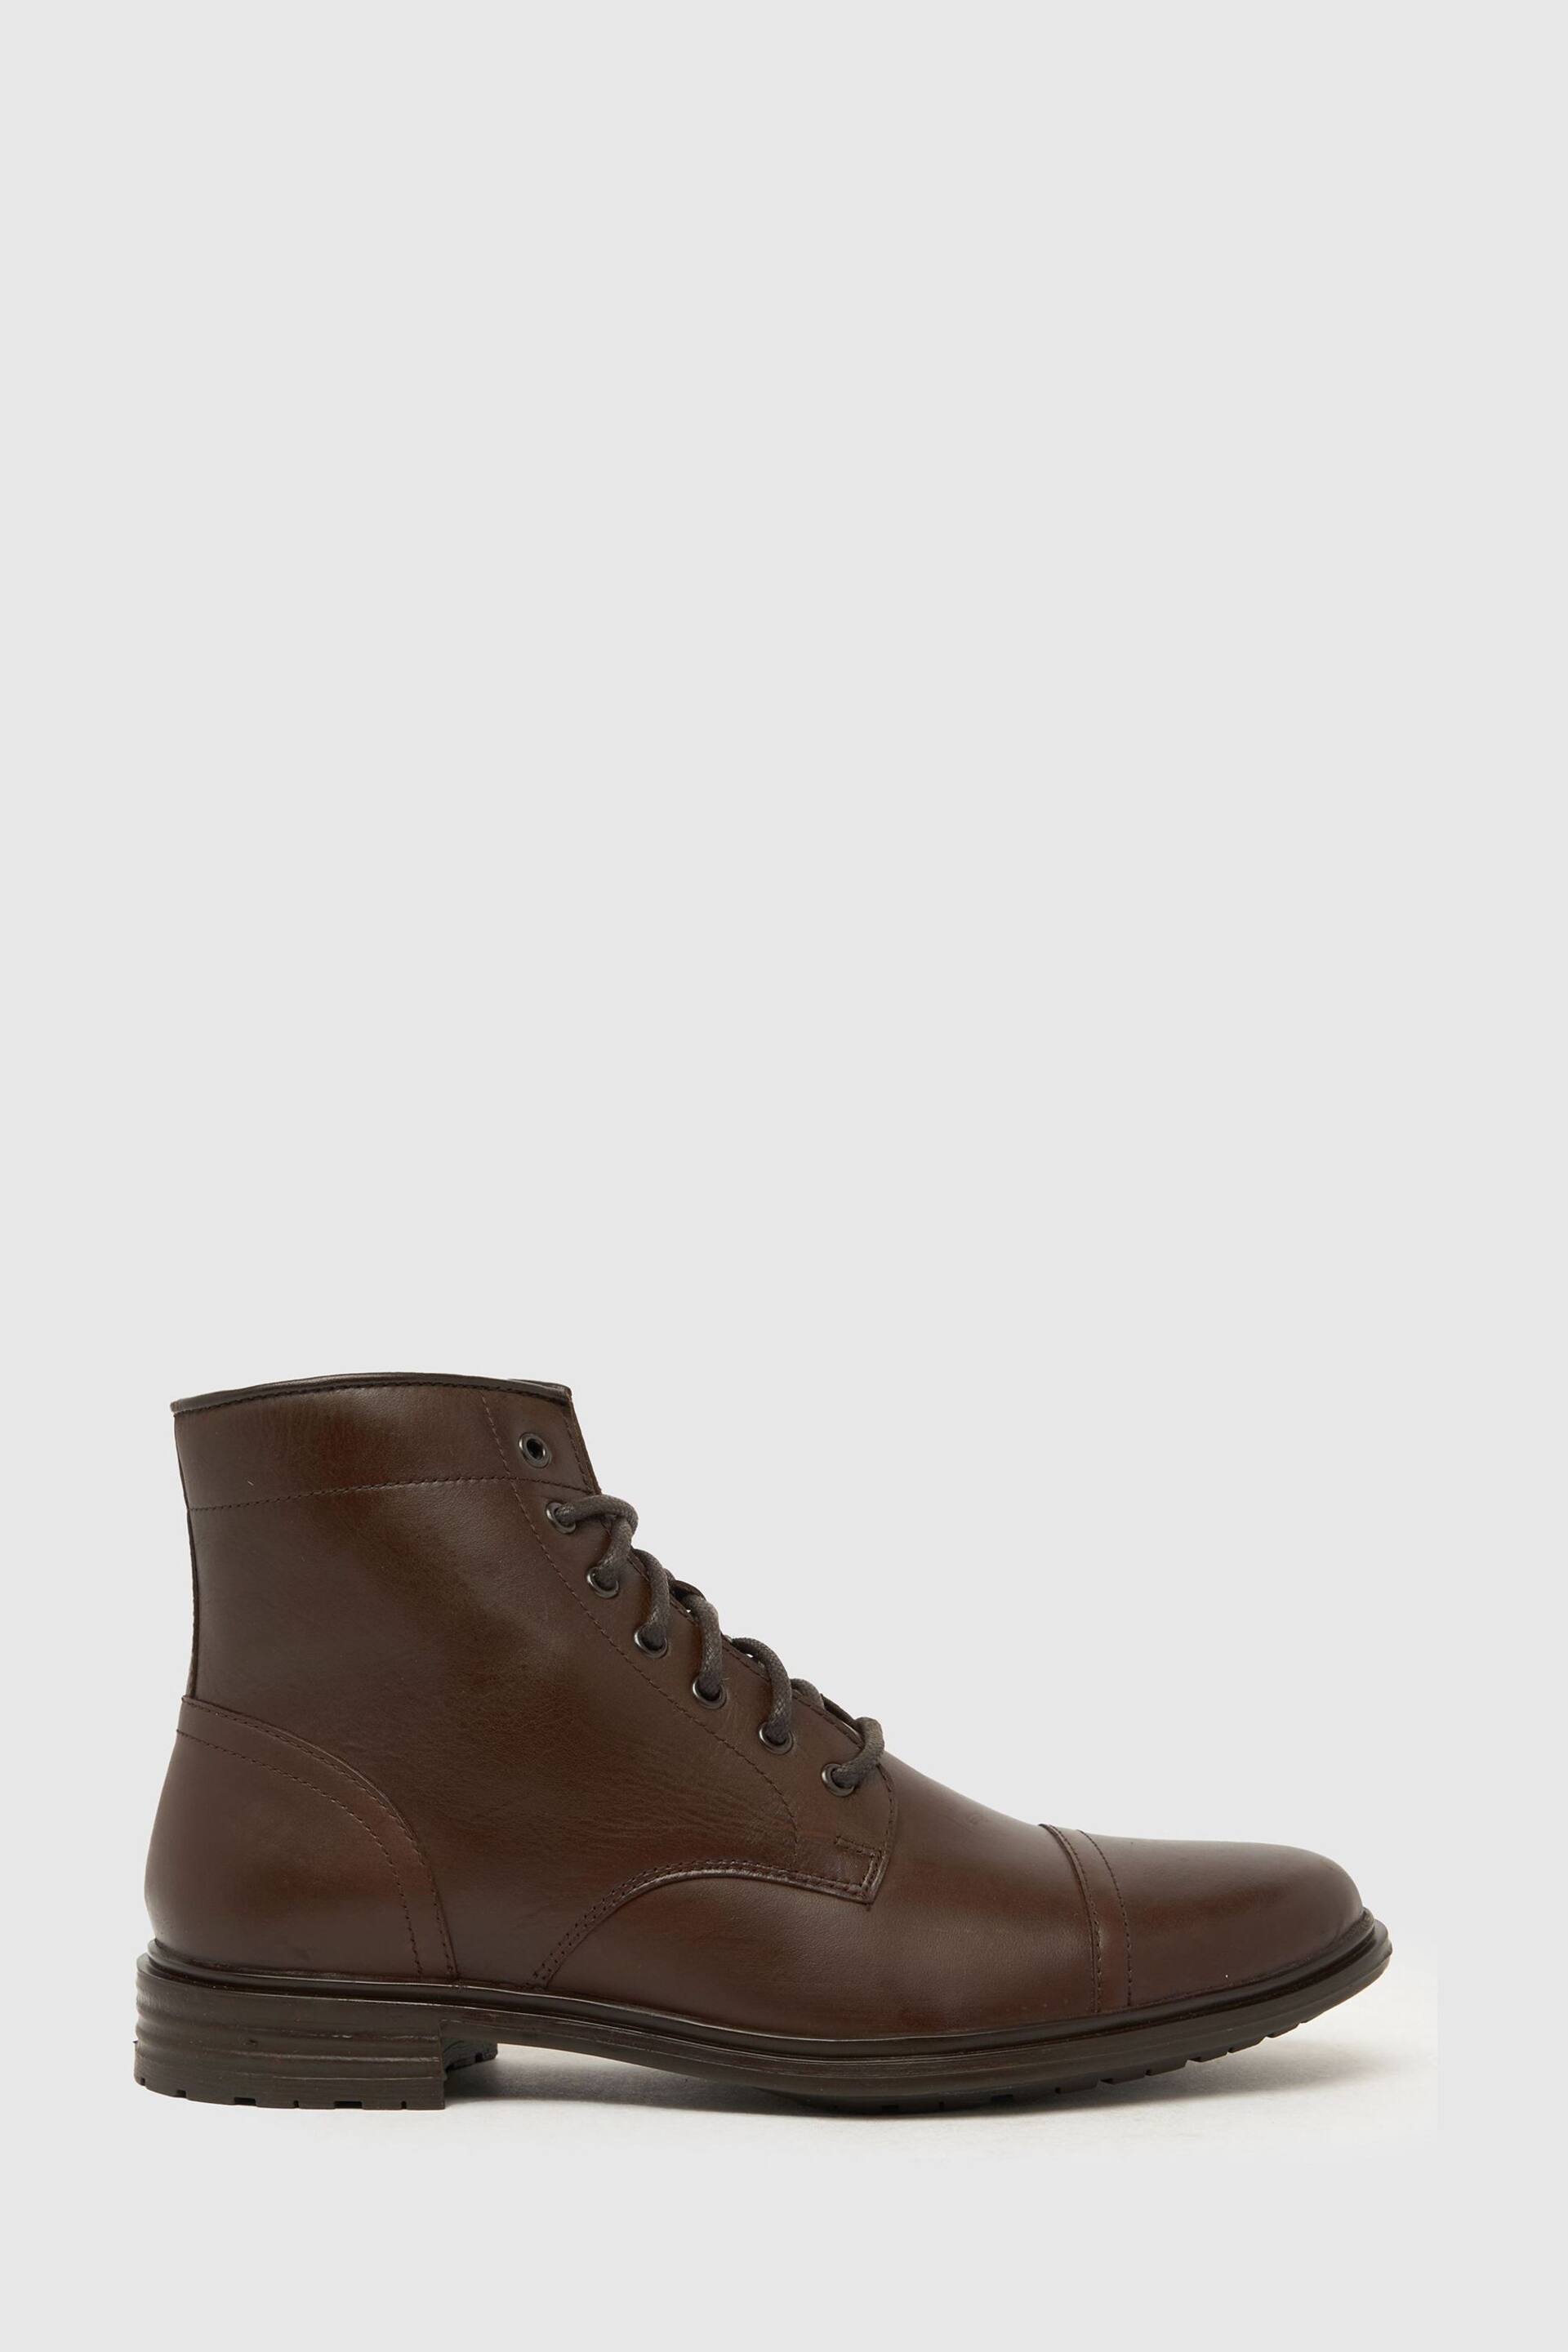 Schuh Deacon Leather Lace Boots - Image 1 of 4